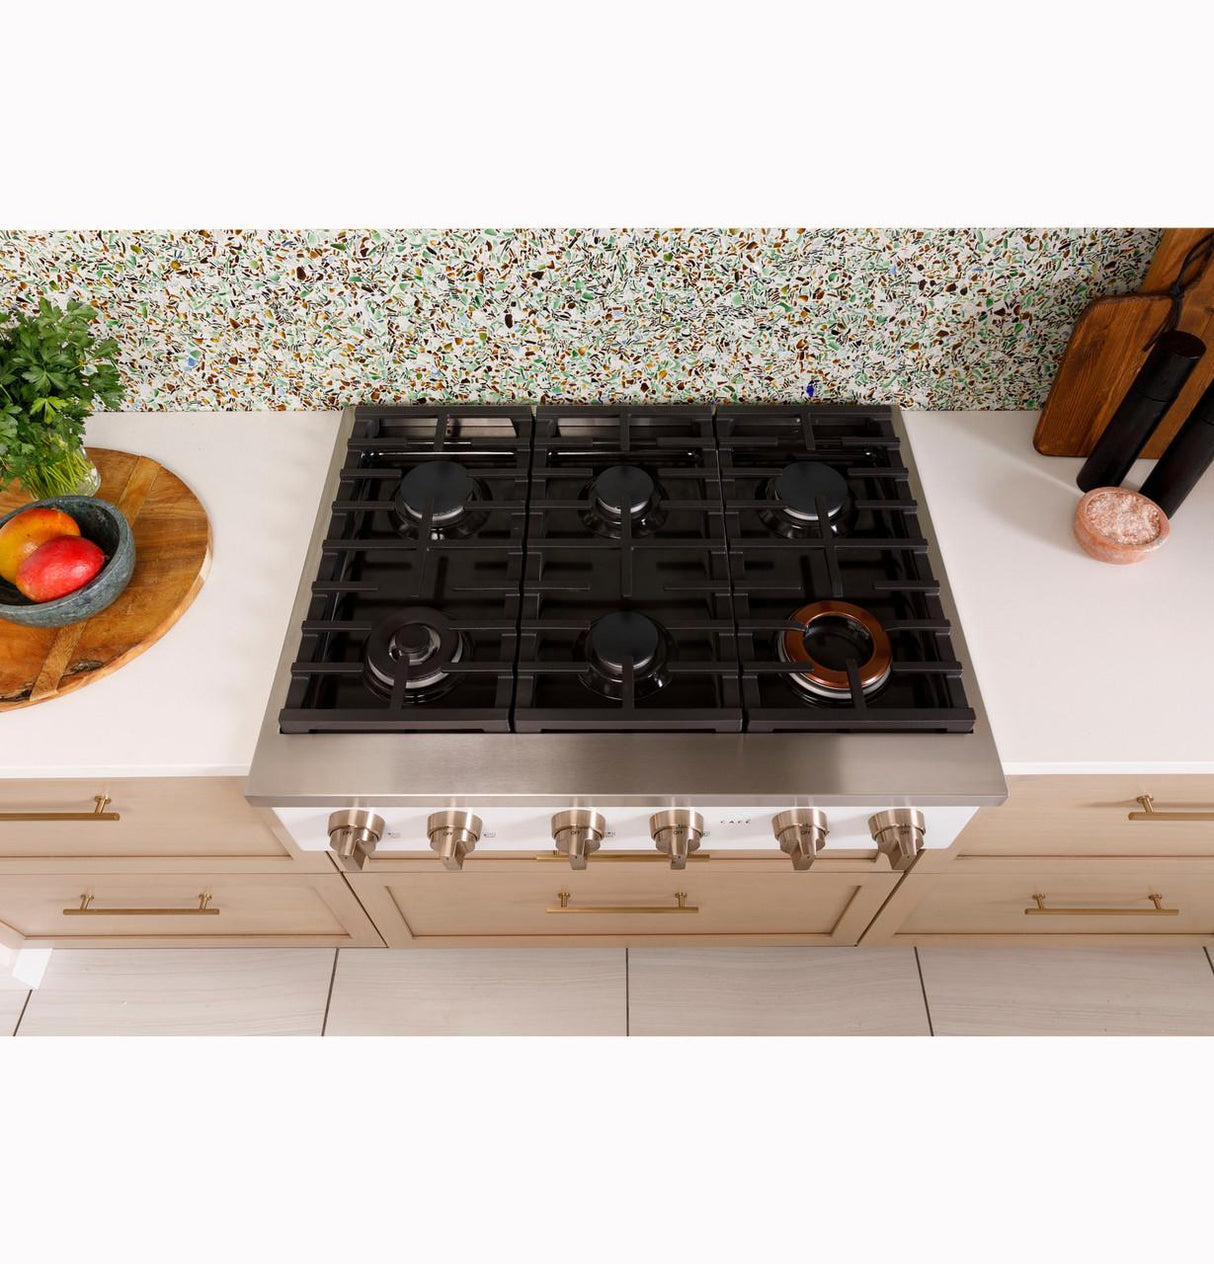 Café 36" Commercial-style Gas Rangetop With 6 Burners (NATURA... CGU366P3TD1